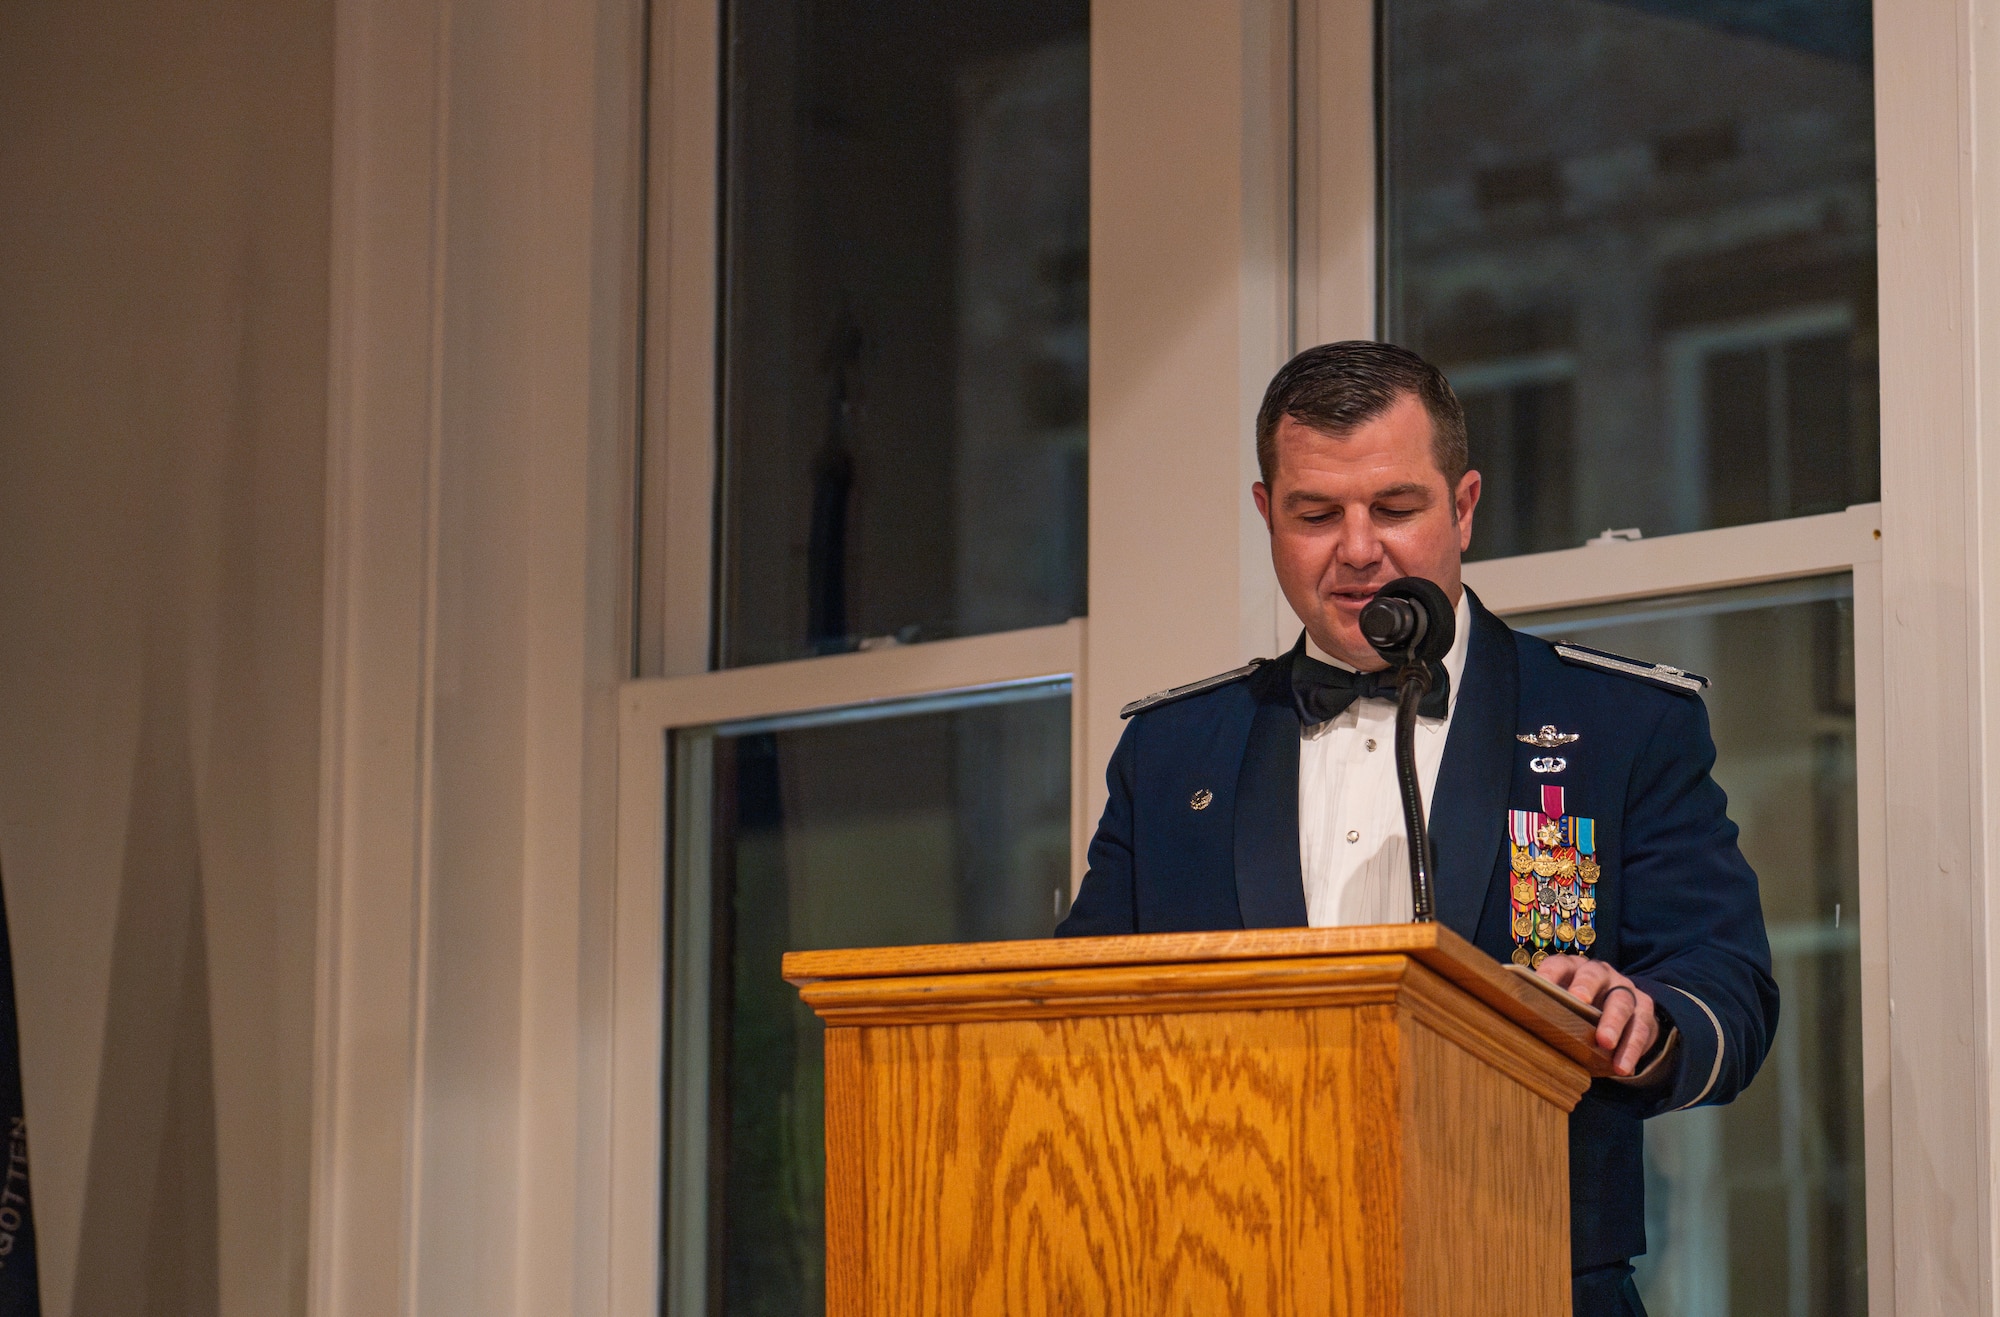 U.S. Air Force Col. Paul Sheets, 23rd Wing commander, gives closing remarks during at Chief Recognition Ceremony in Valdosta, Georgia, March 16, 2023. The Chief Recognition Ceremony is a chance for base leadership to honor and celebrate newly selected chief master sergeants. (U.S. Air Force Photo by Airman 1st Class Sir Wyrick)